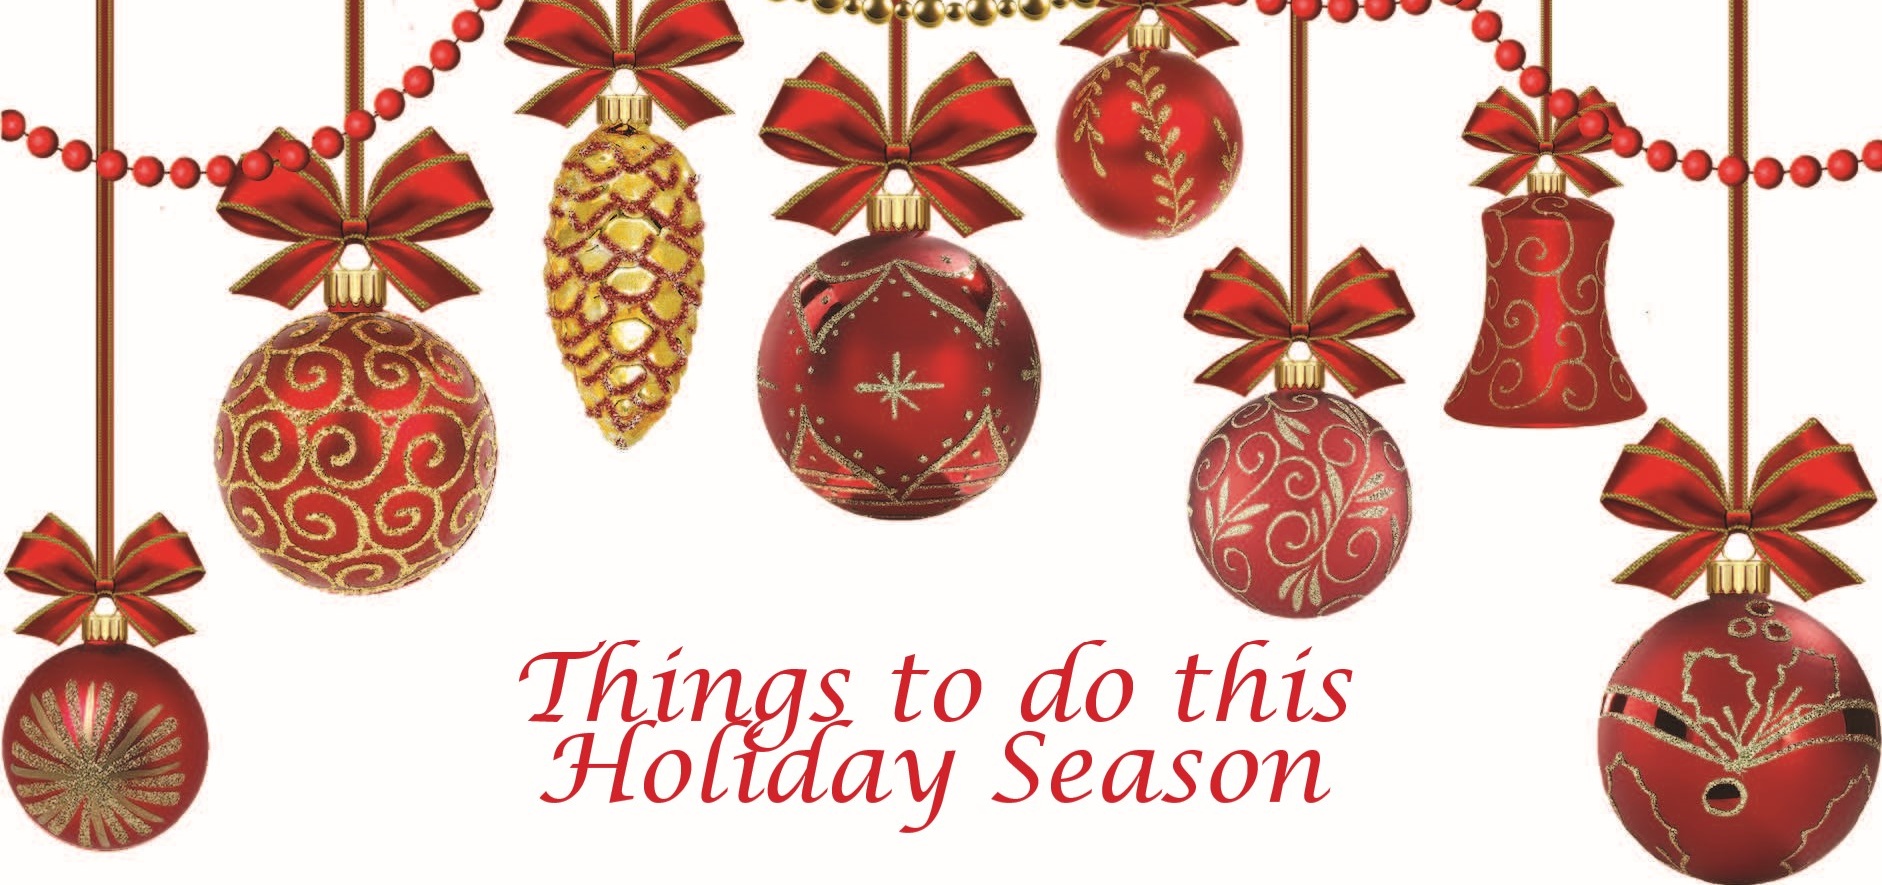 Things to do this Holiday Season